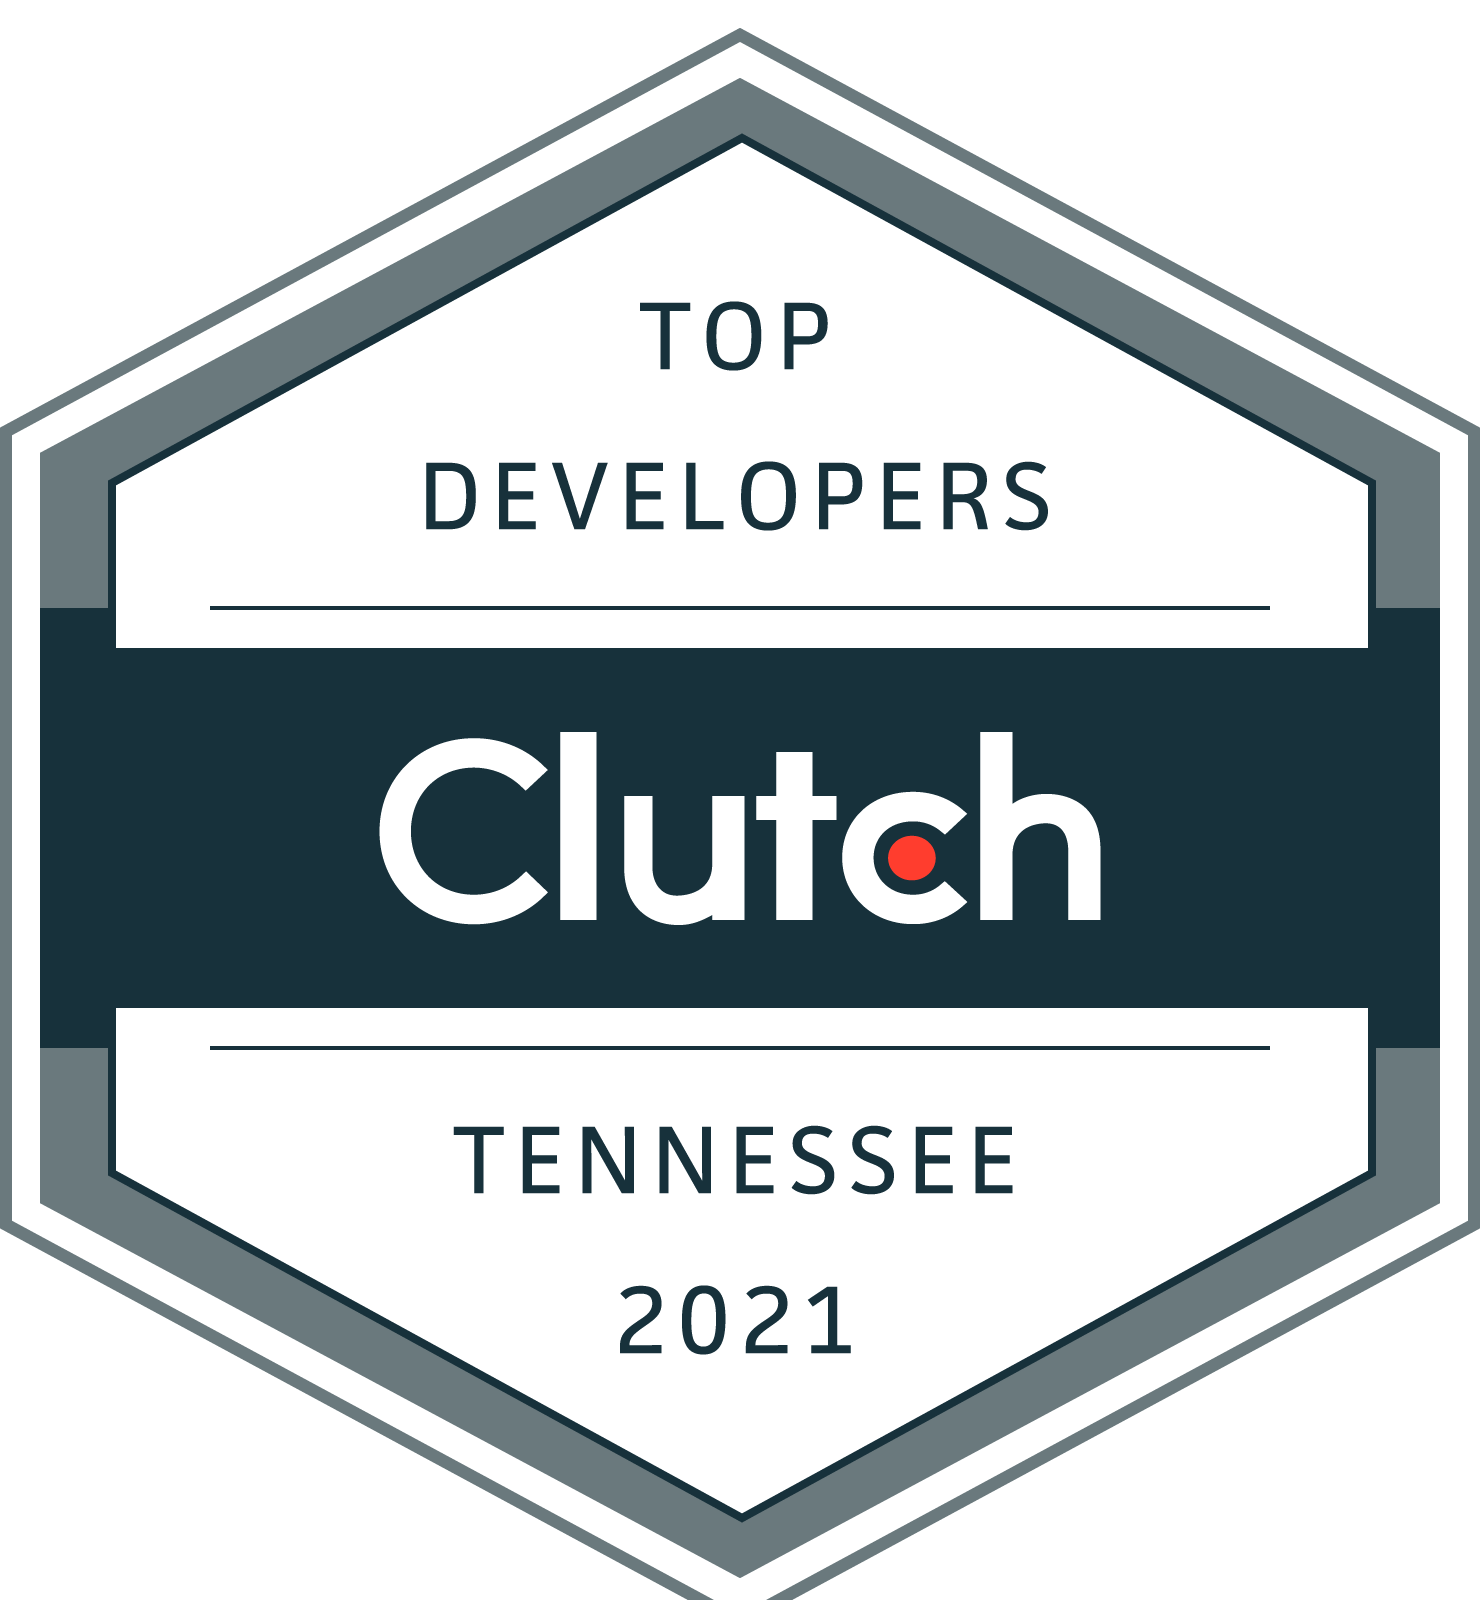 Clutch top developers tennessee